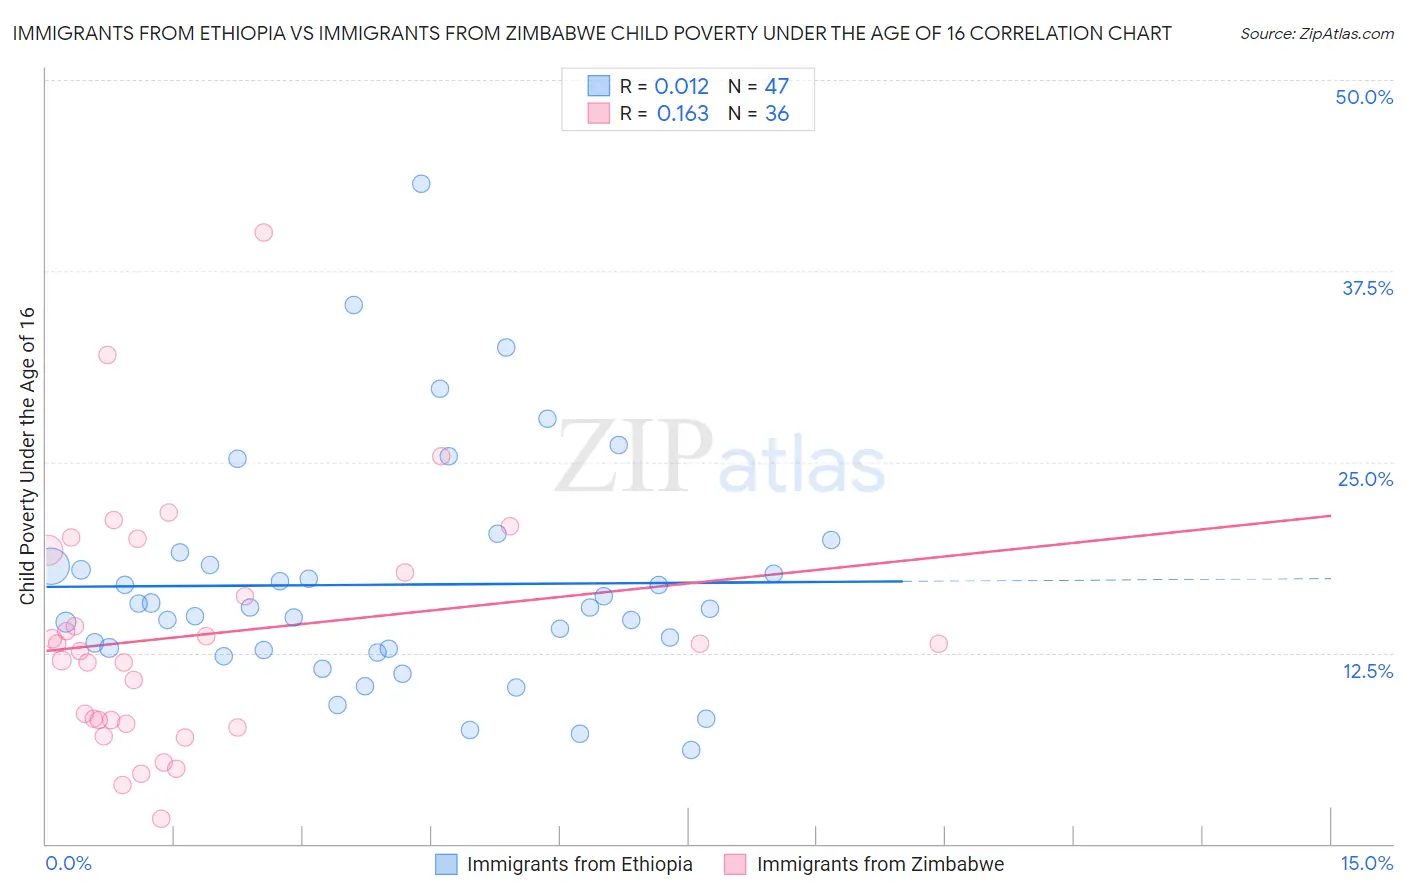 Immigrants from Ethiopia vs Immigrants from Zimbabwe Child Poverty Under the Age of 16